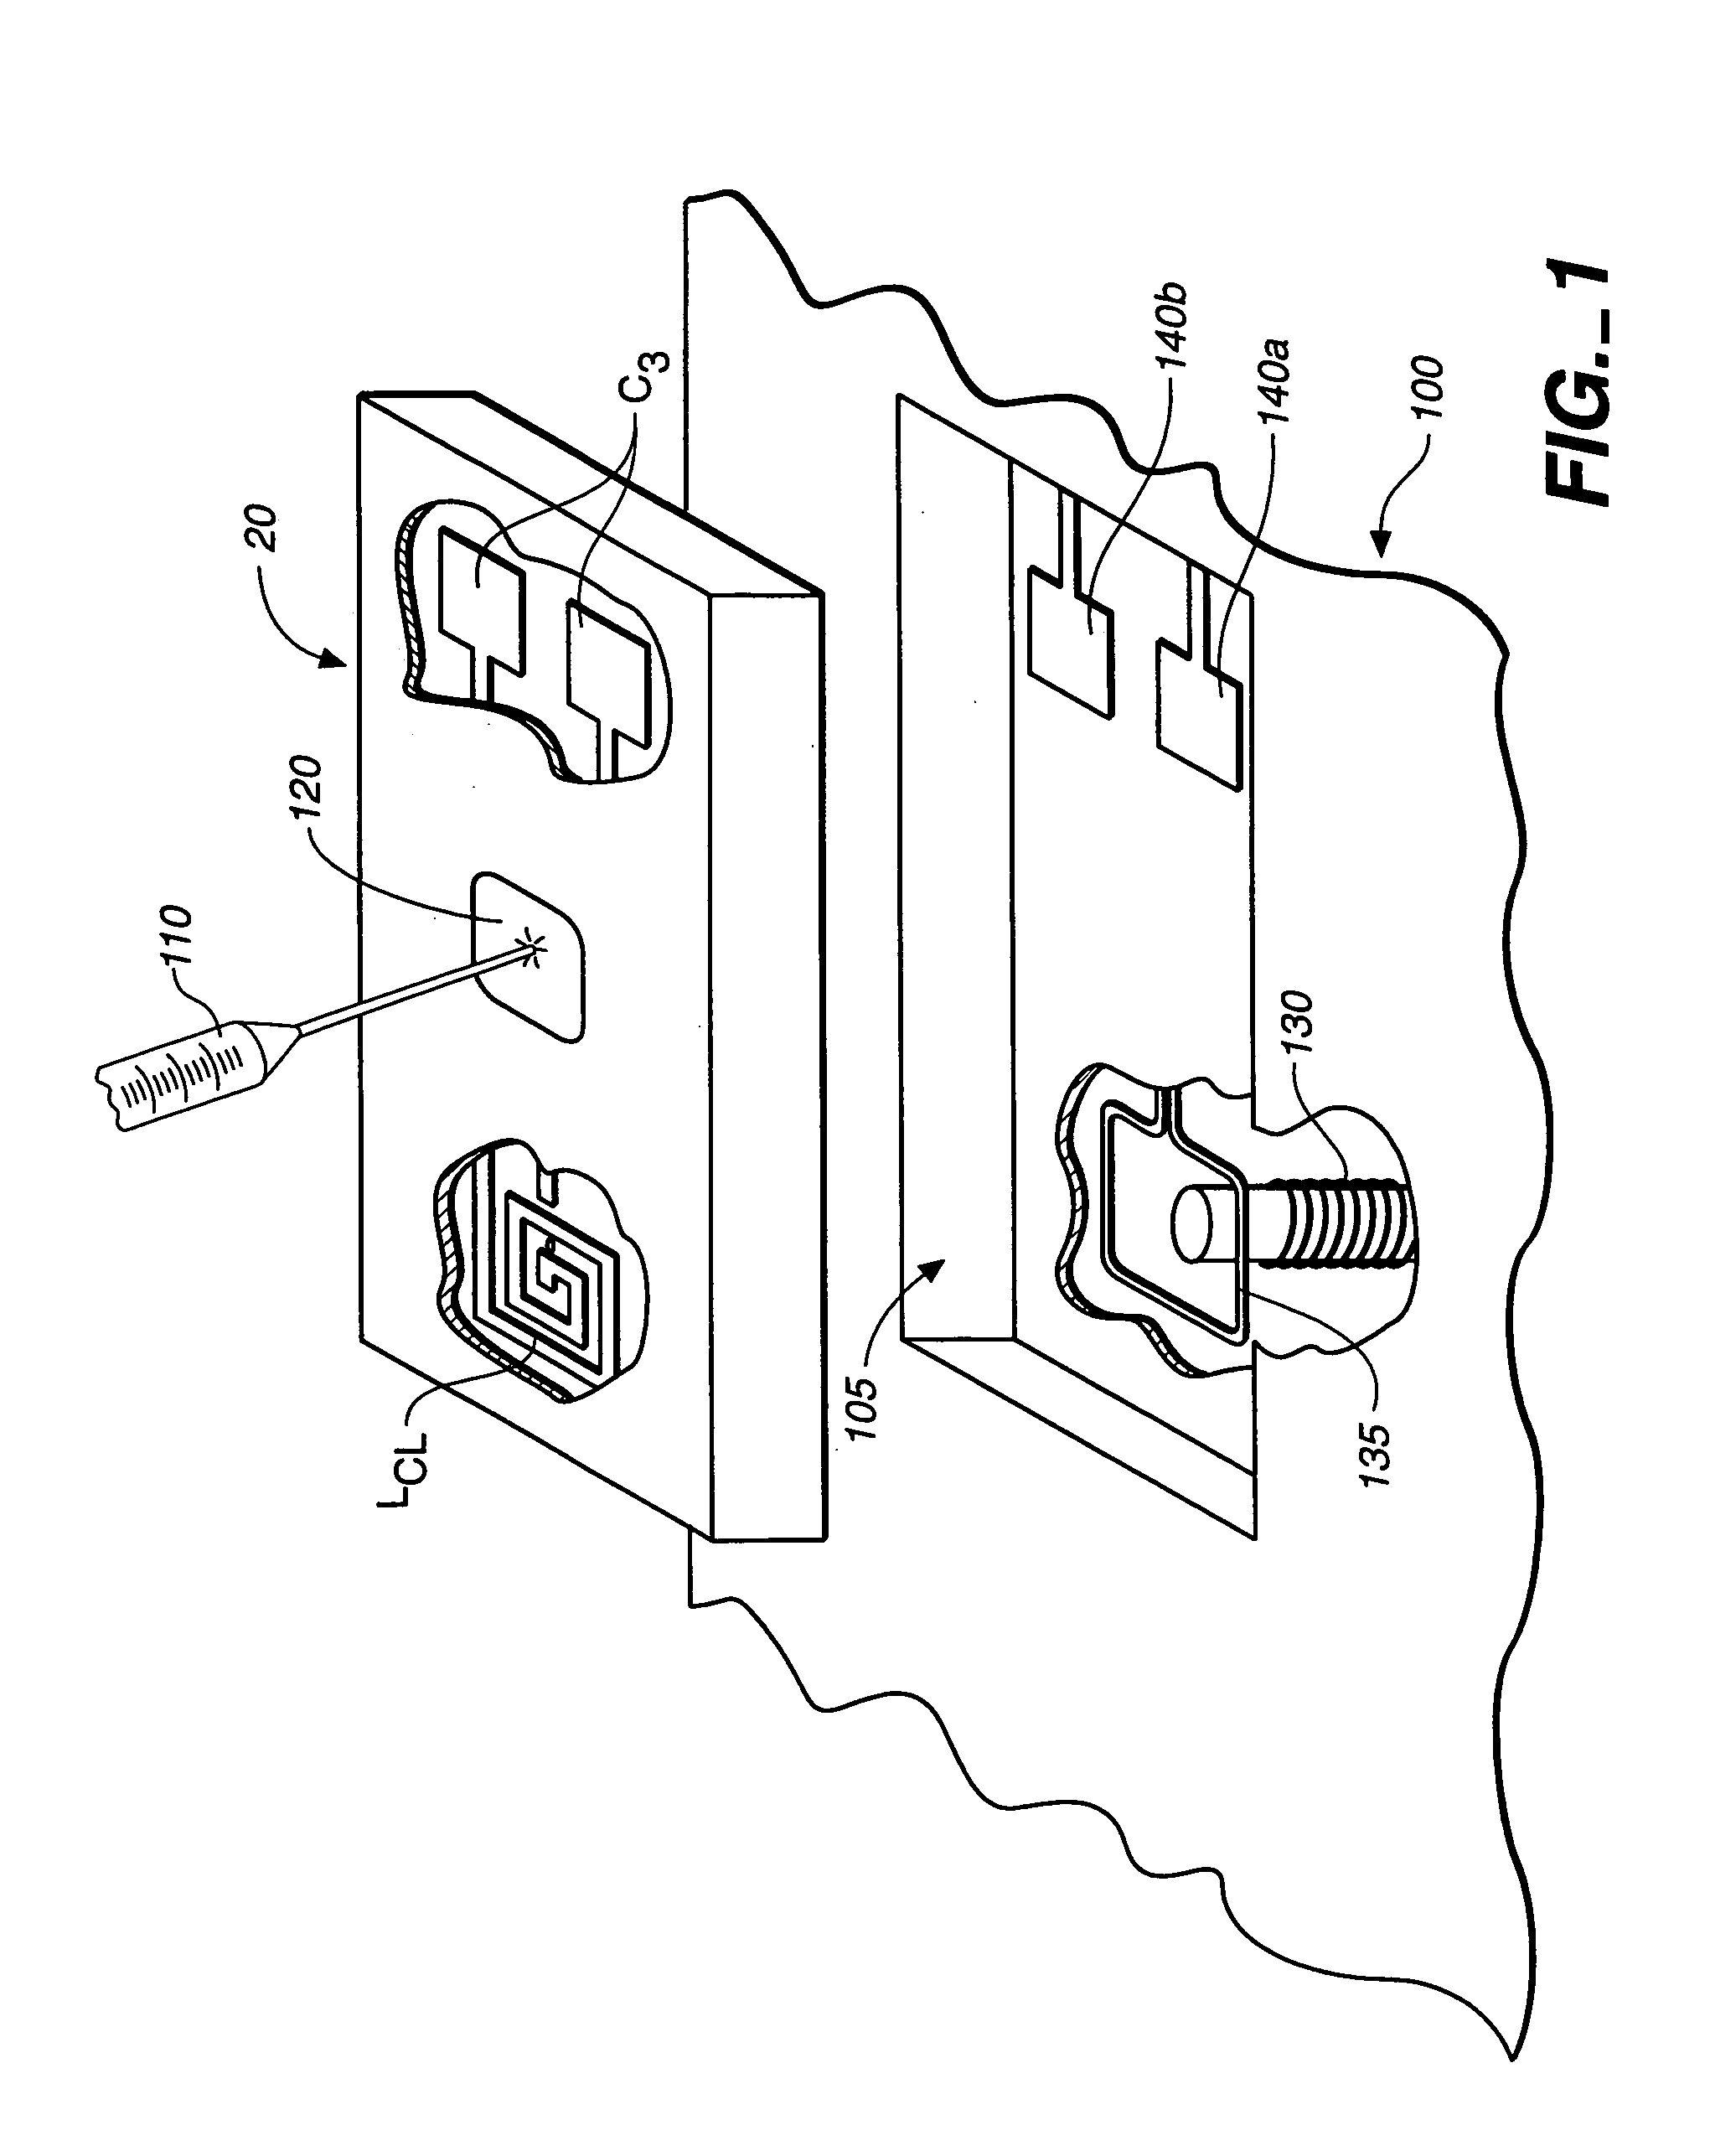 Microfabricated reactor